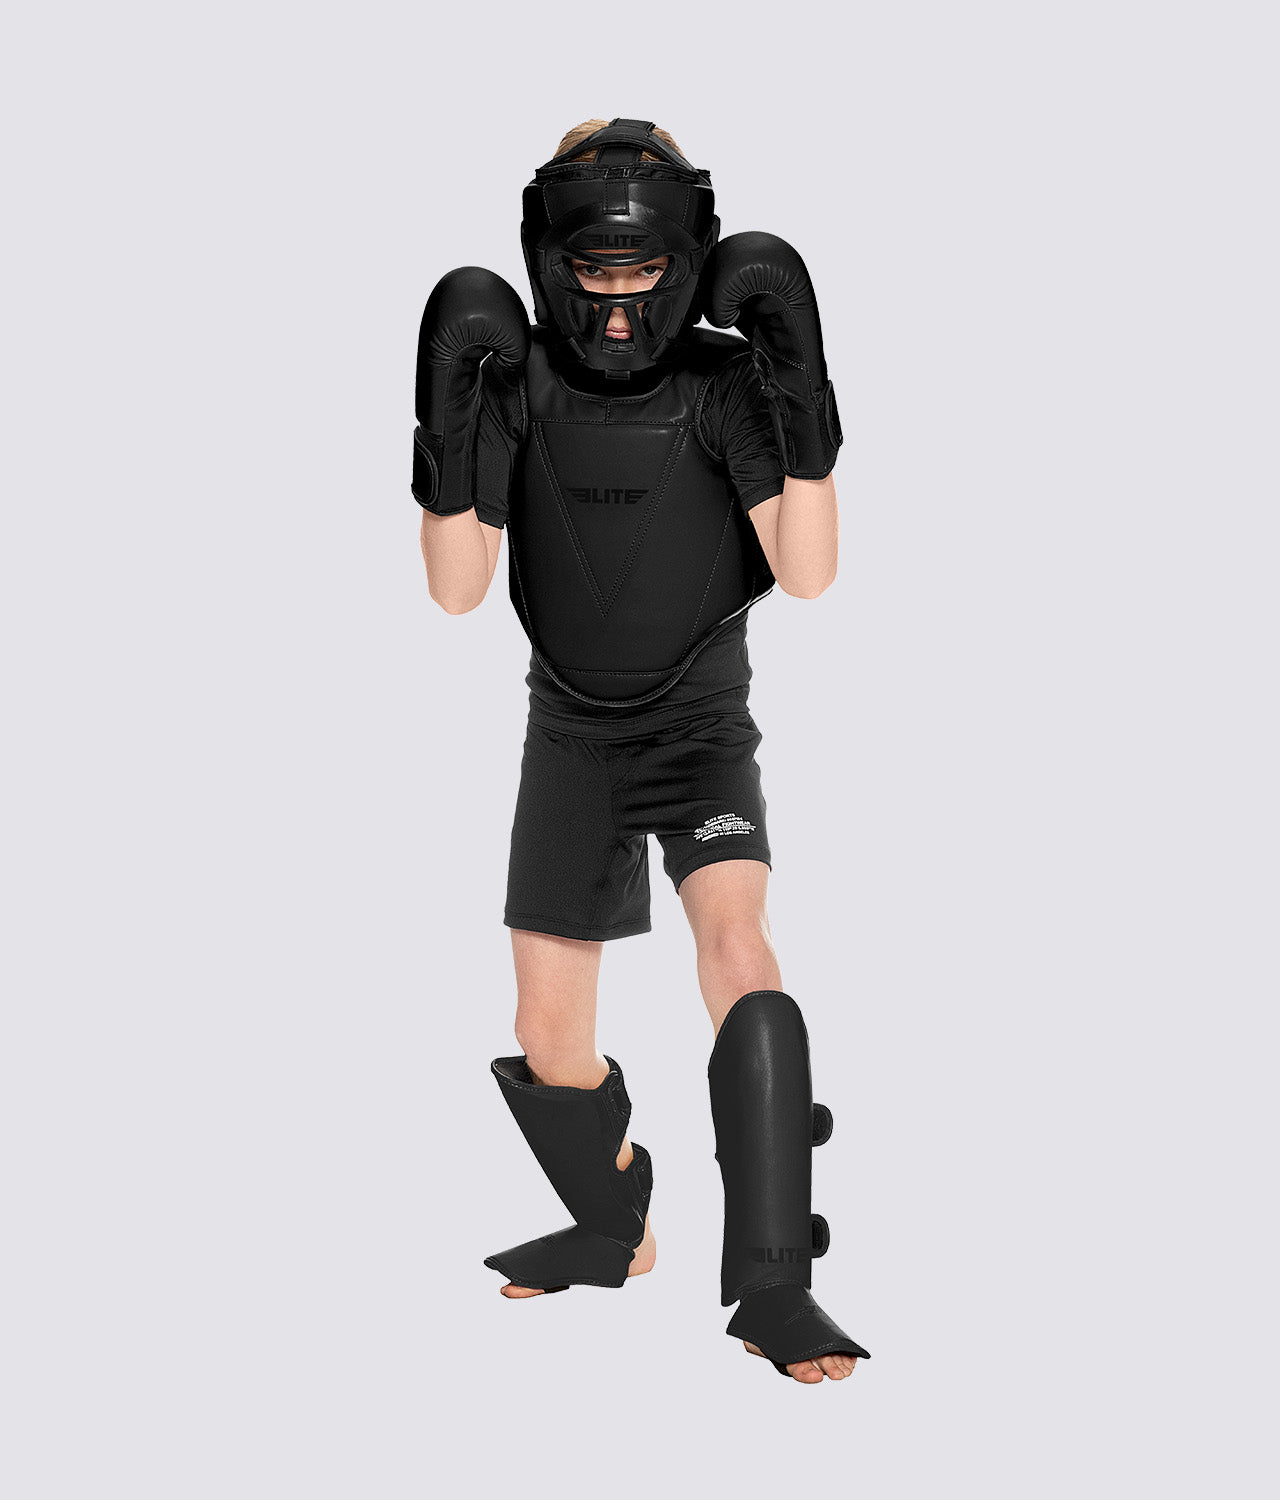 Elite Sports Kids' Black Boxing Chest Guard : 4 to 8 Years